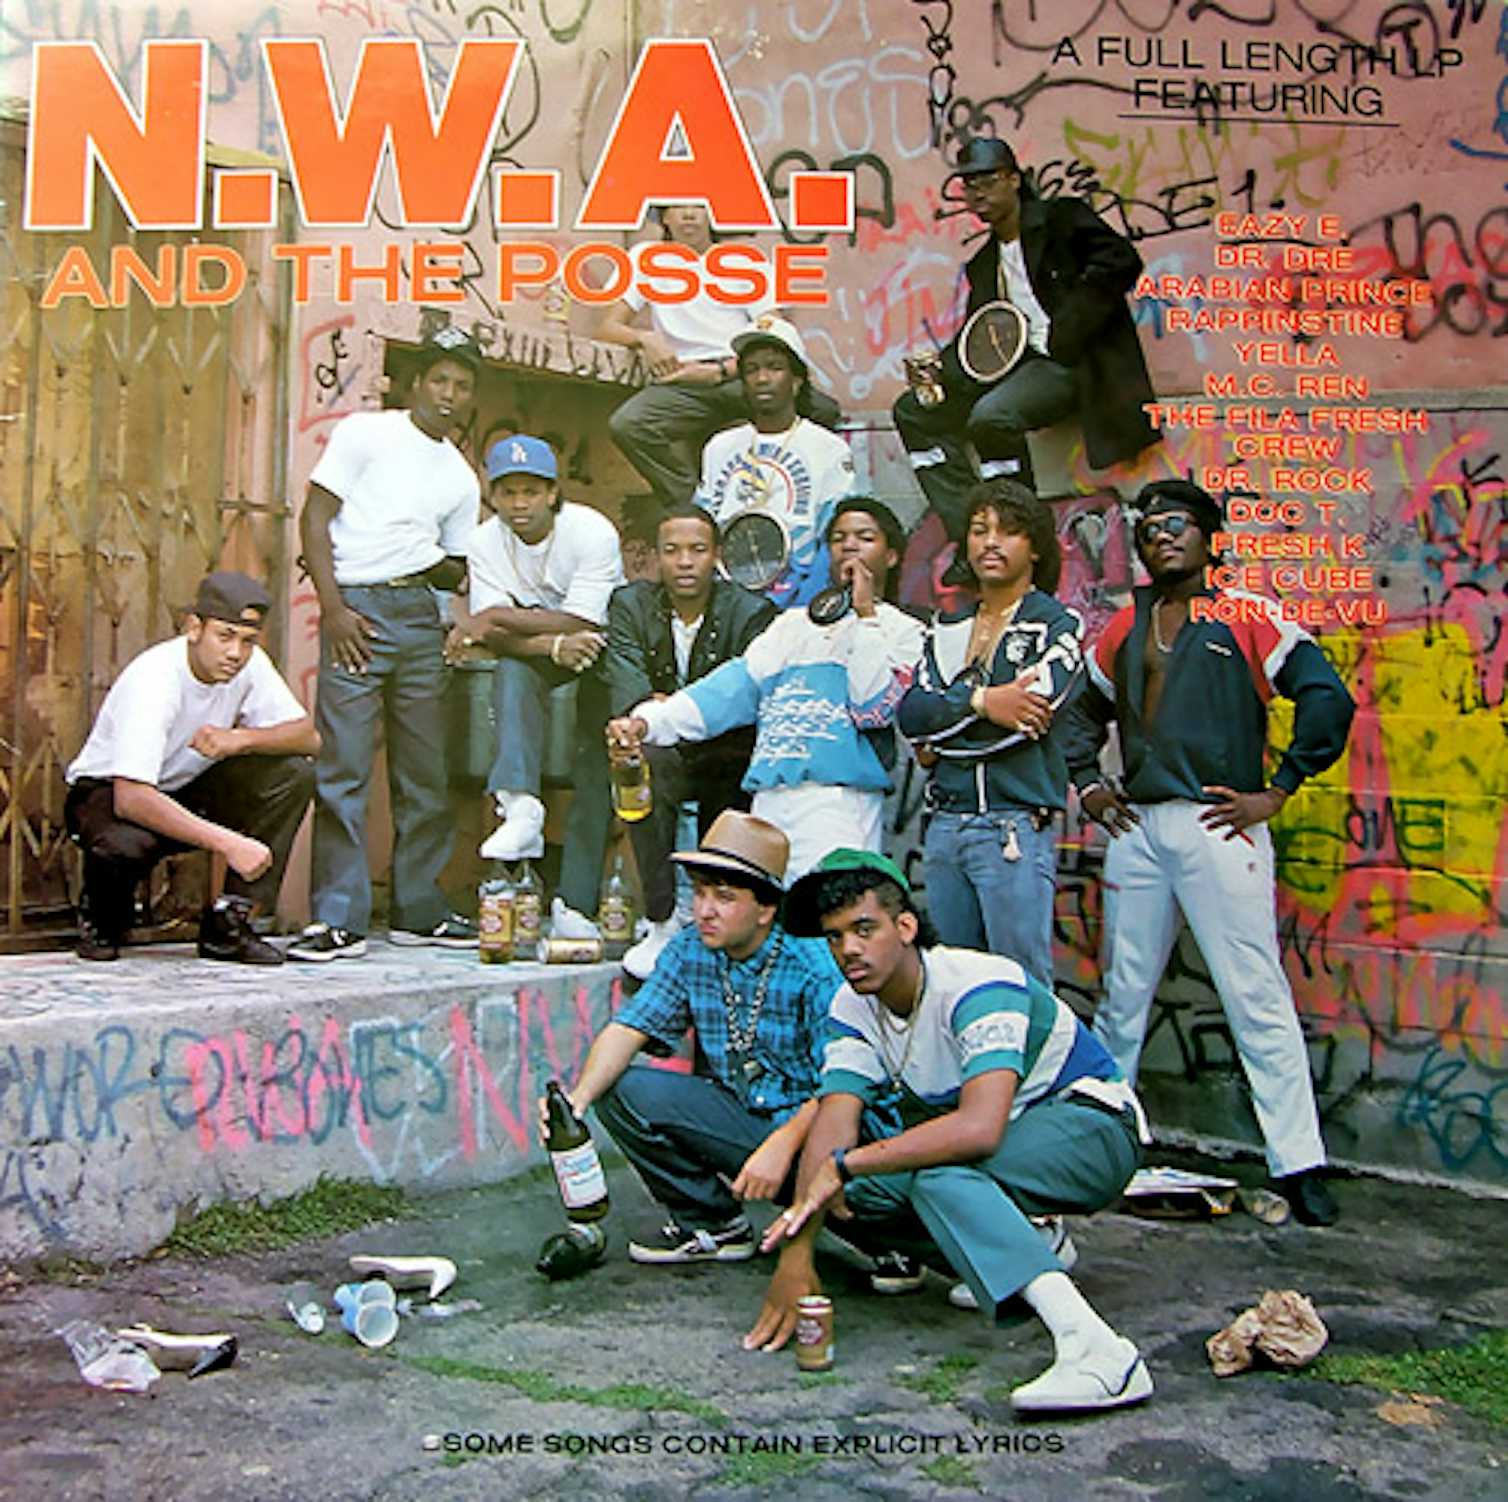 Compton commodified: NWA was always a blend of fiction and reality